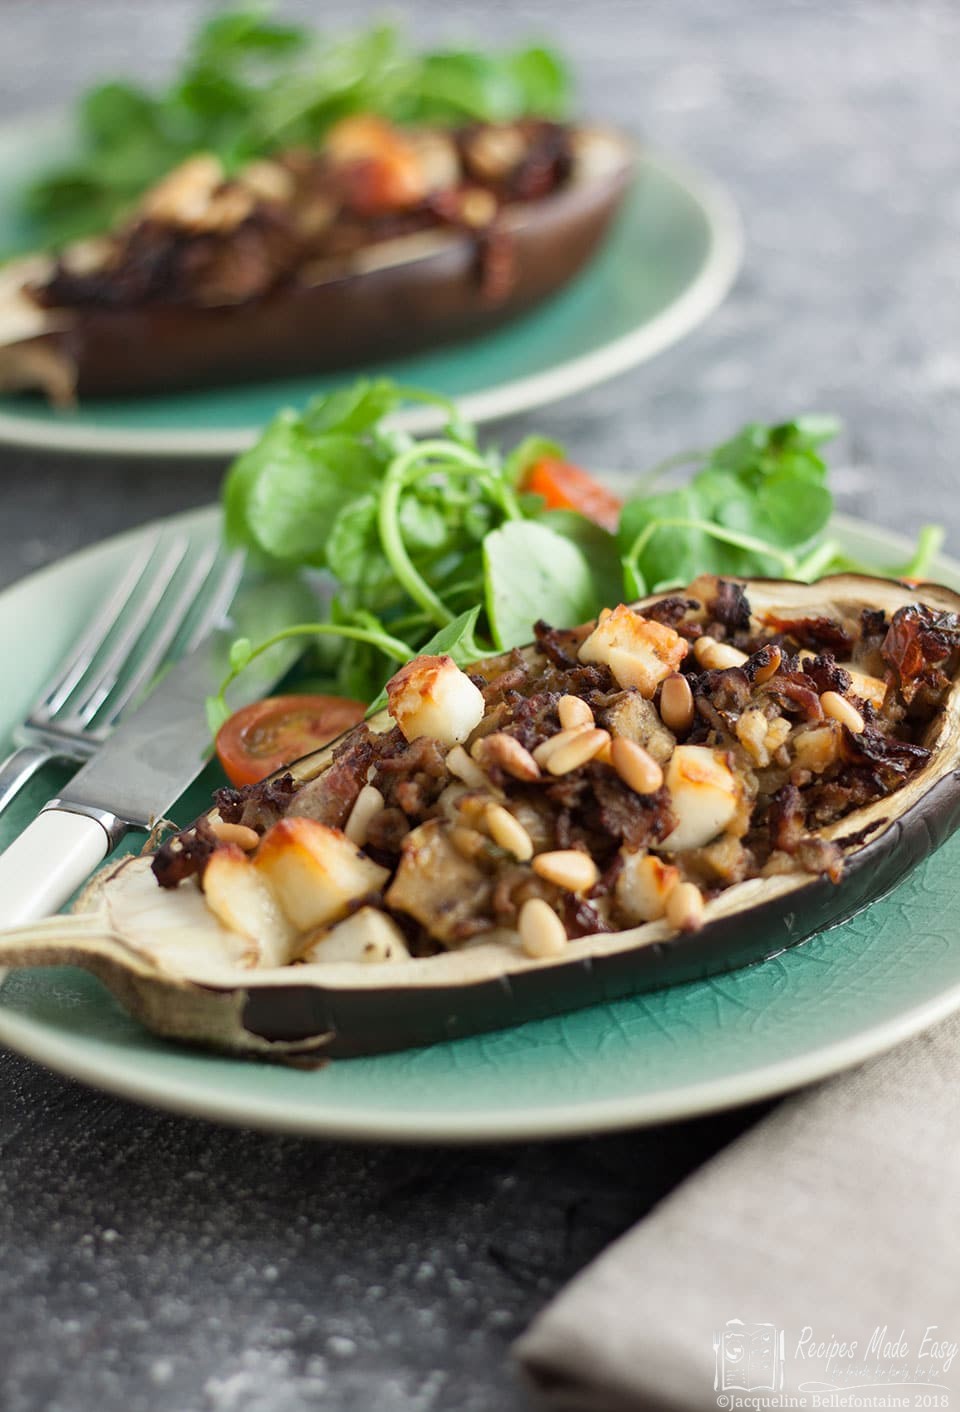 stuffed aubergine with lamb and haloumi a simple and quick to prepare dish.